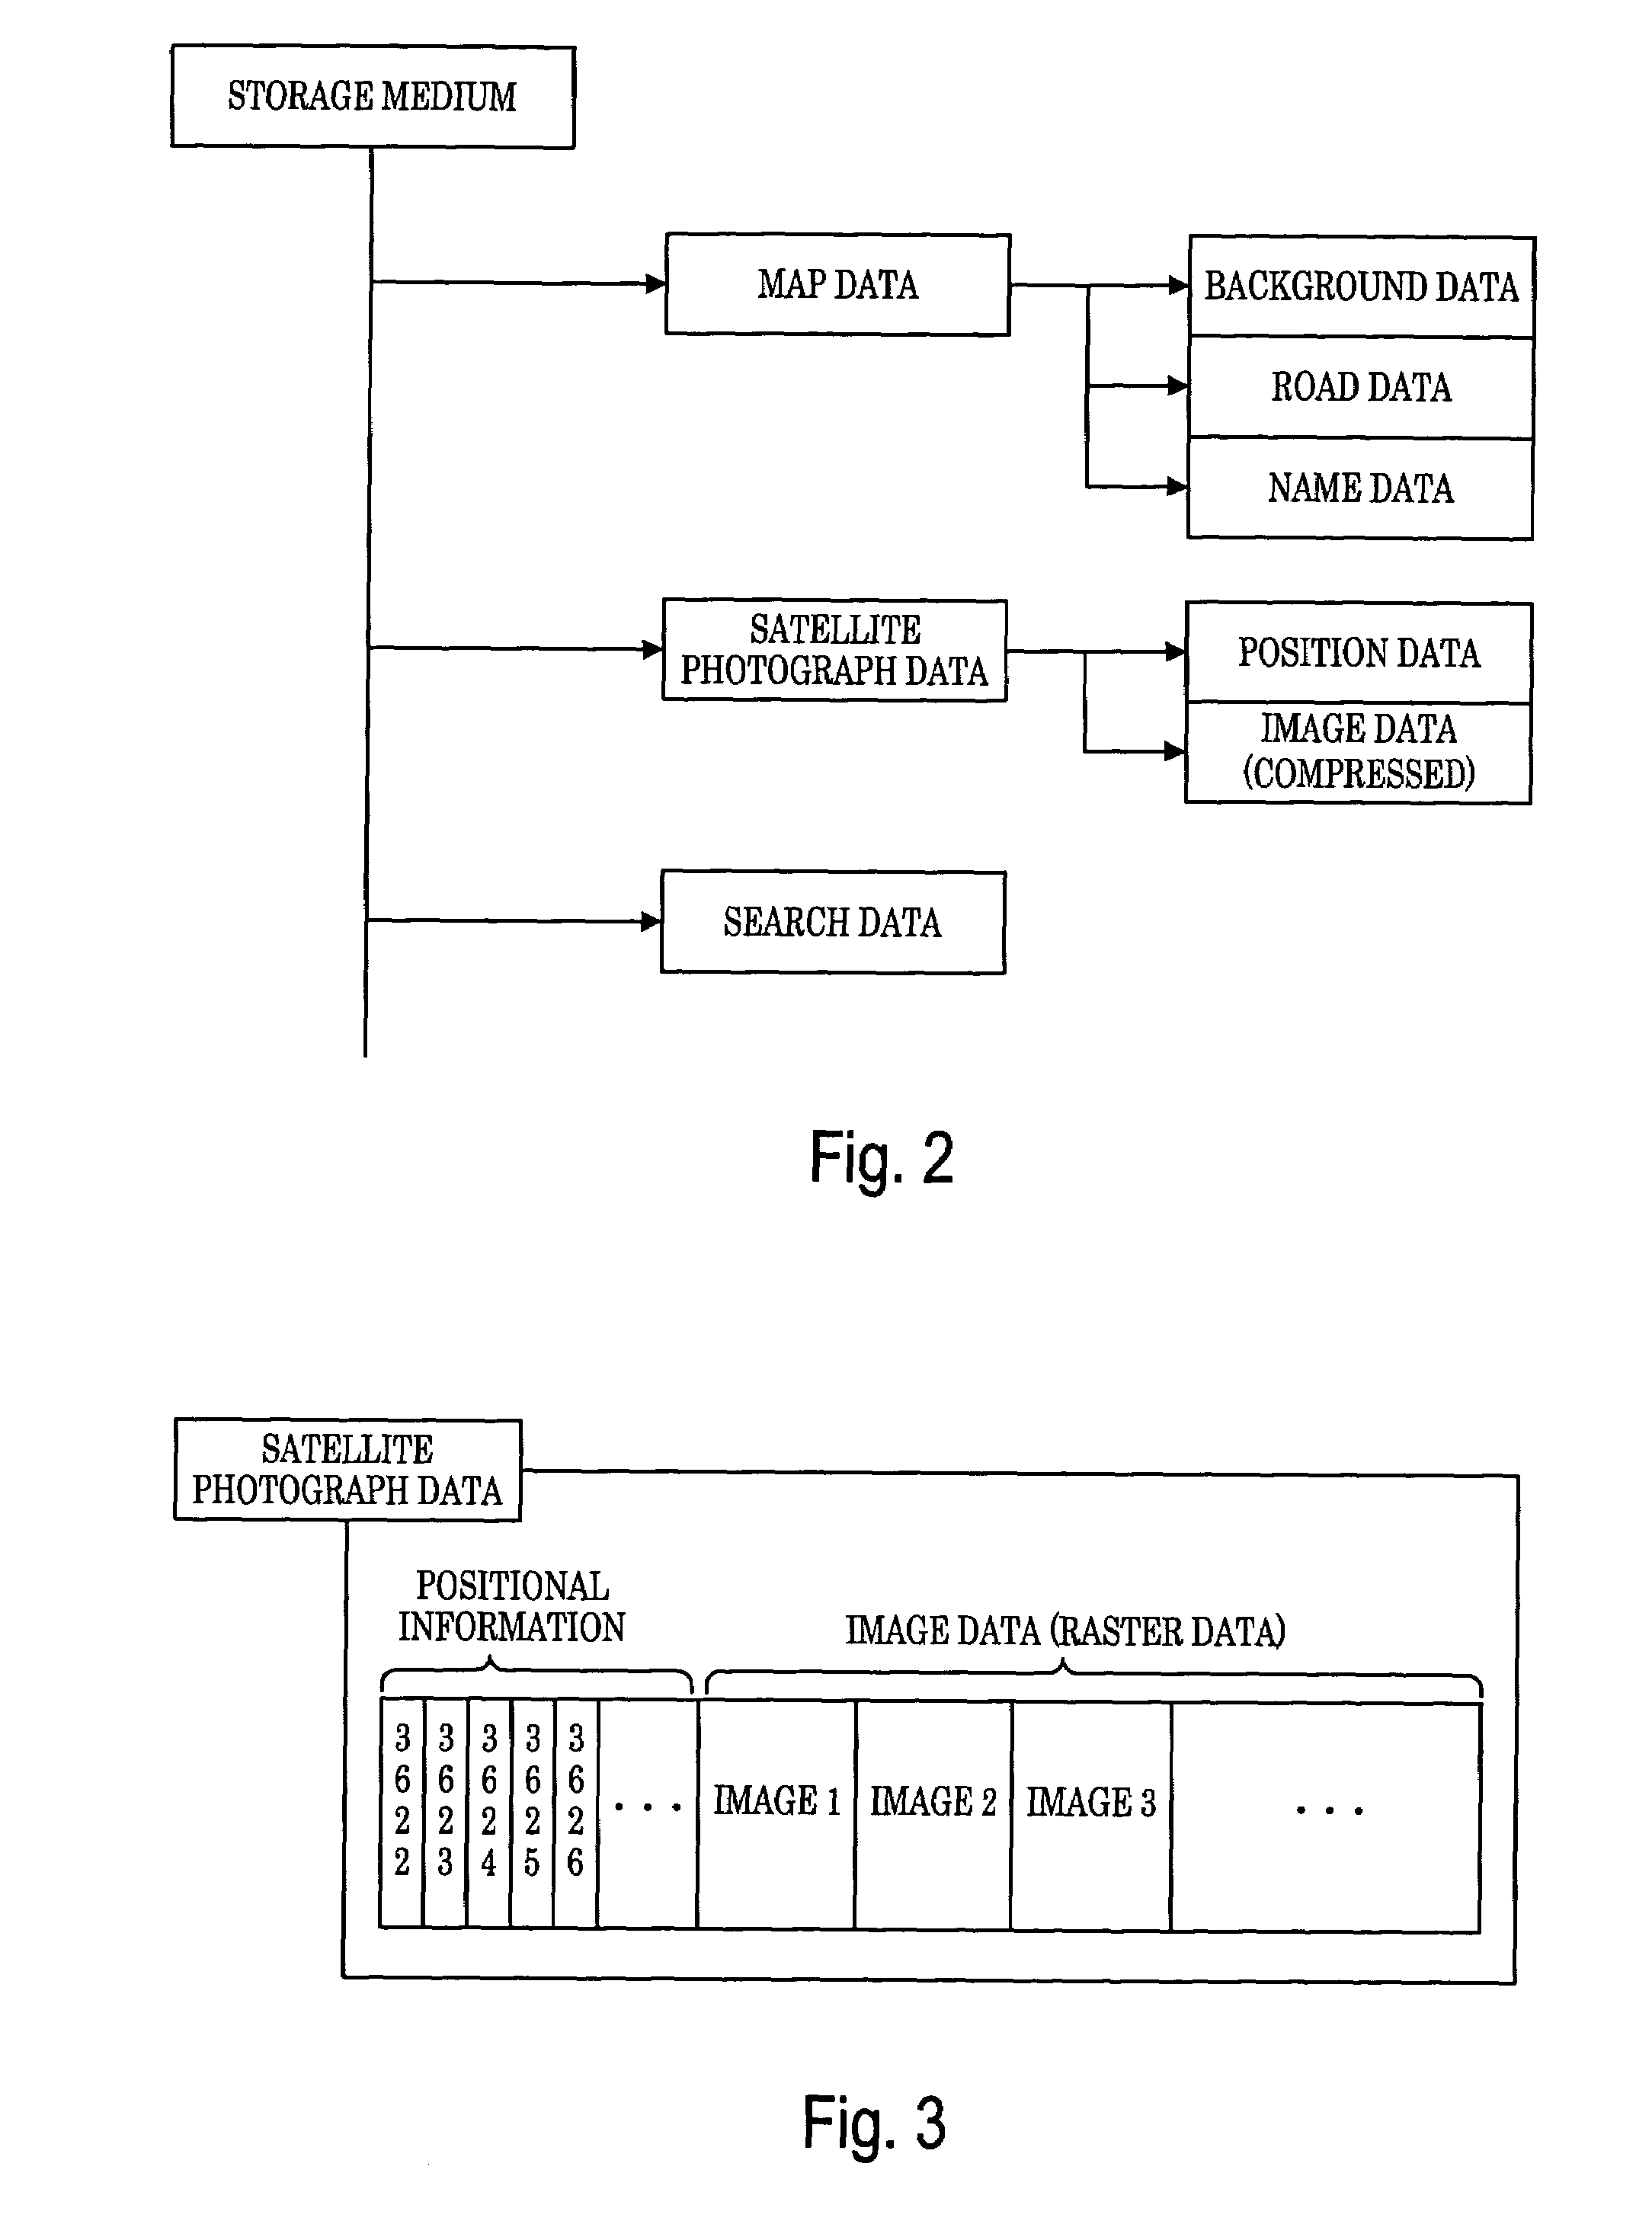 Unit and program for displaying map